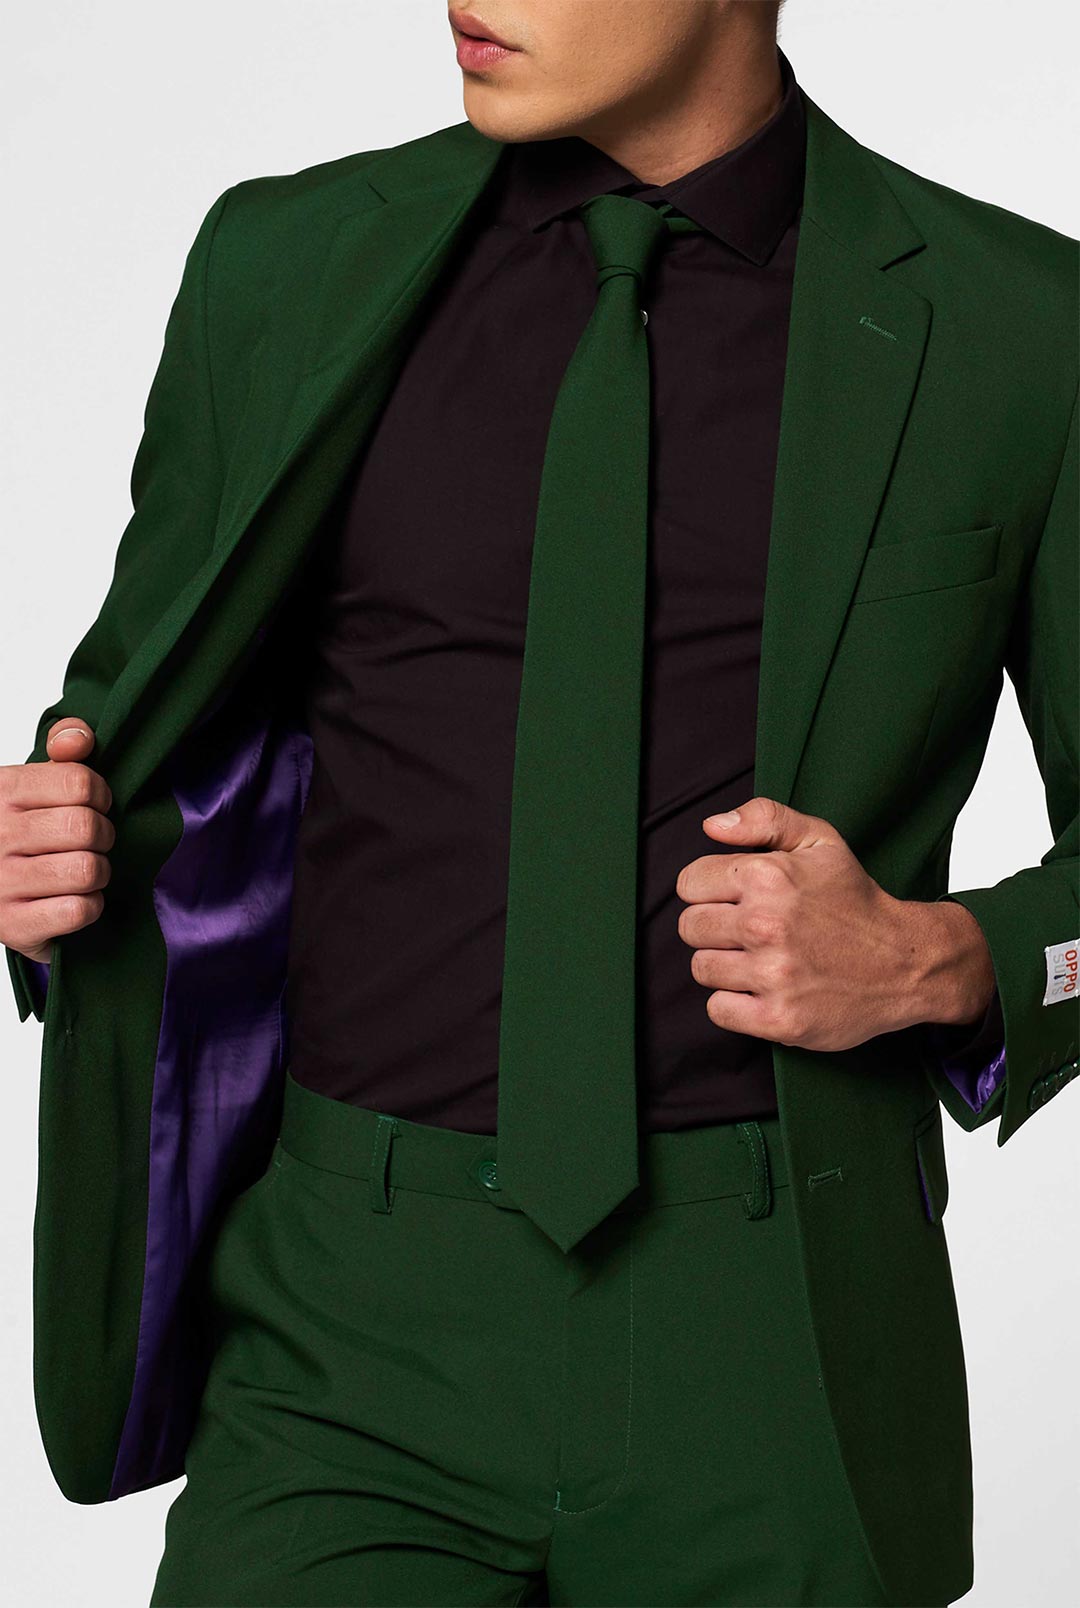 Made Suits® Sartorial Tailor — WEARING A GREEN SUIT IS NOT AS HARD AS YOU  MIGHT THINK